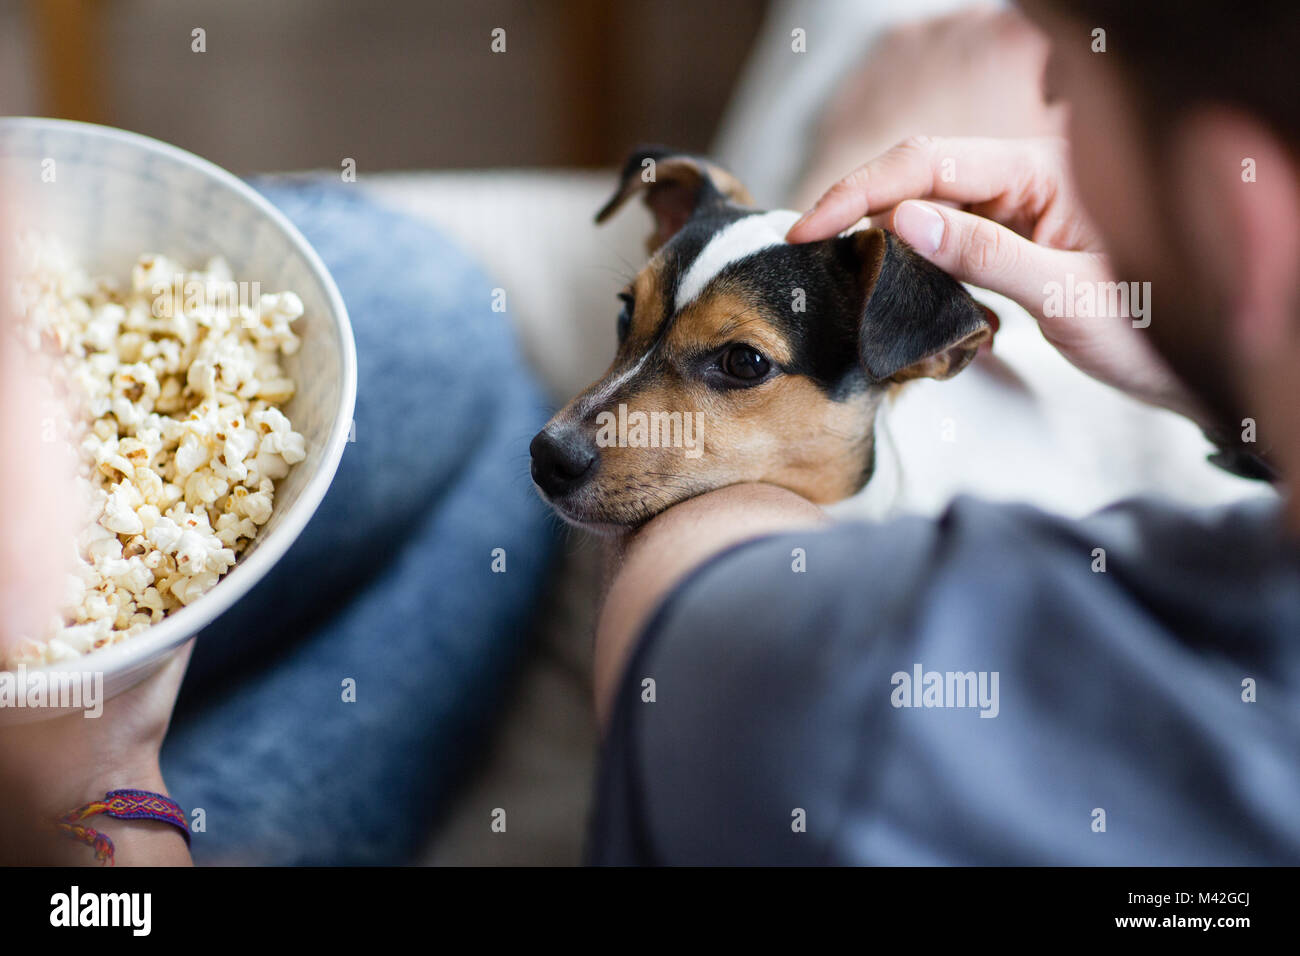 Puppy looking at bowl of popcorn Stock Photo